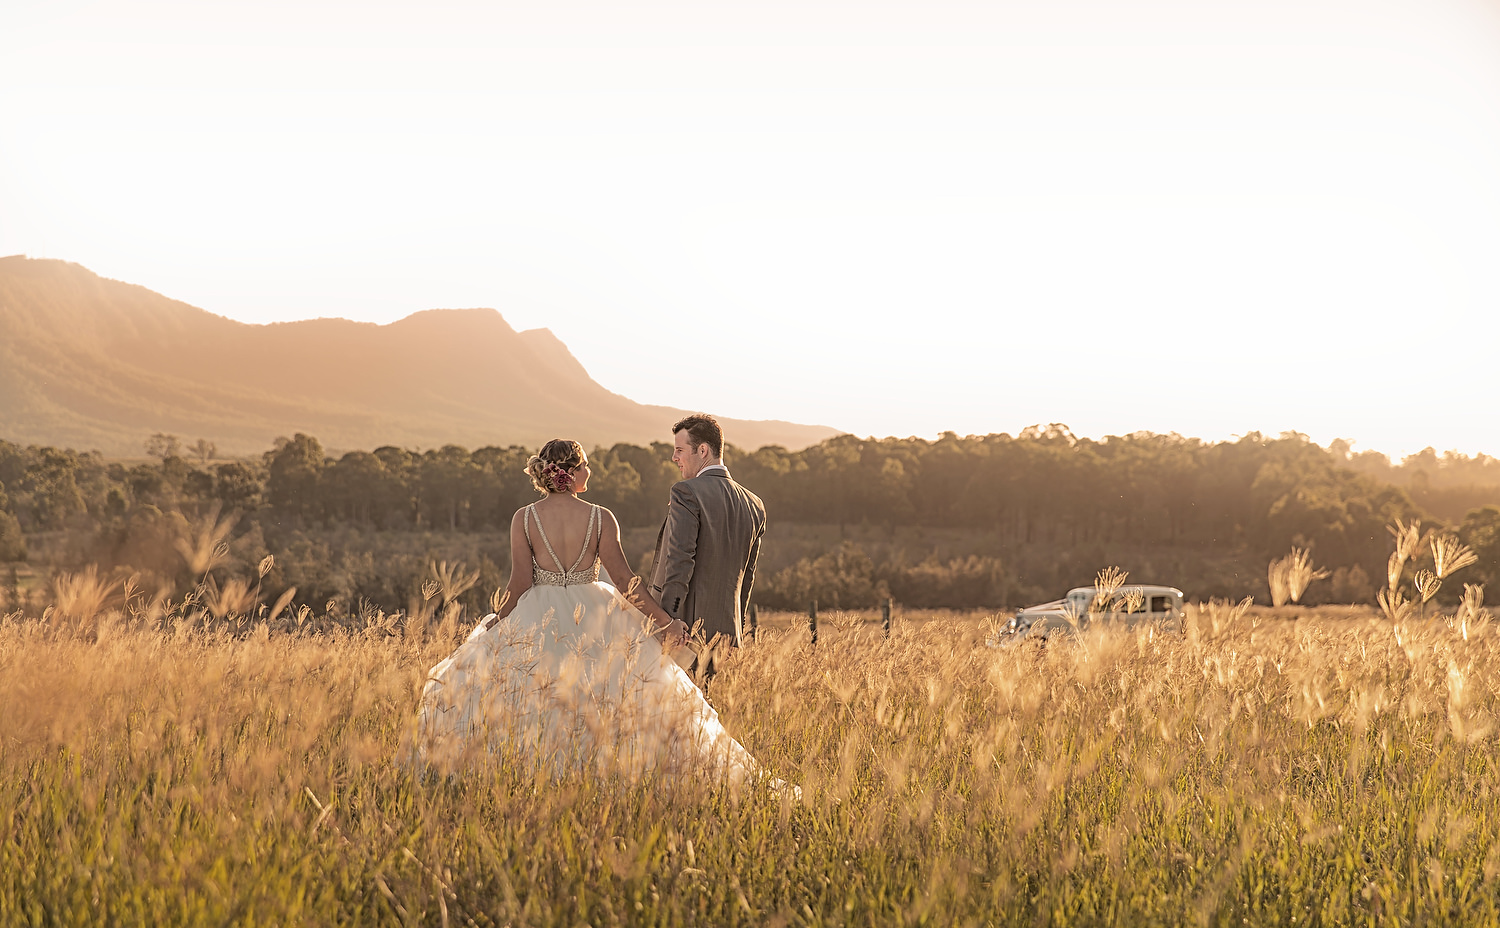 grass bride and groom in the hunter valley wedding with car in the background 